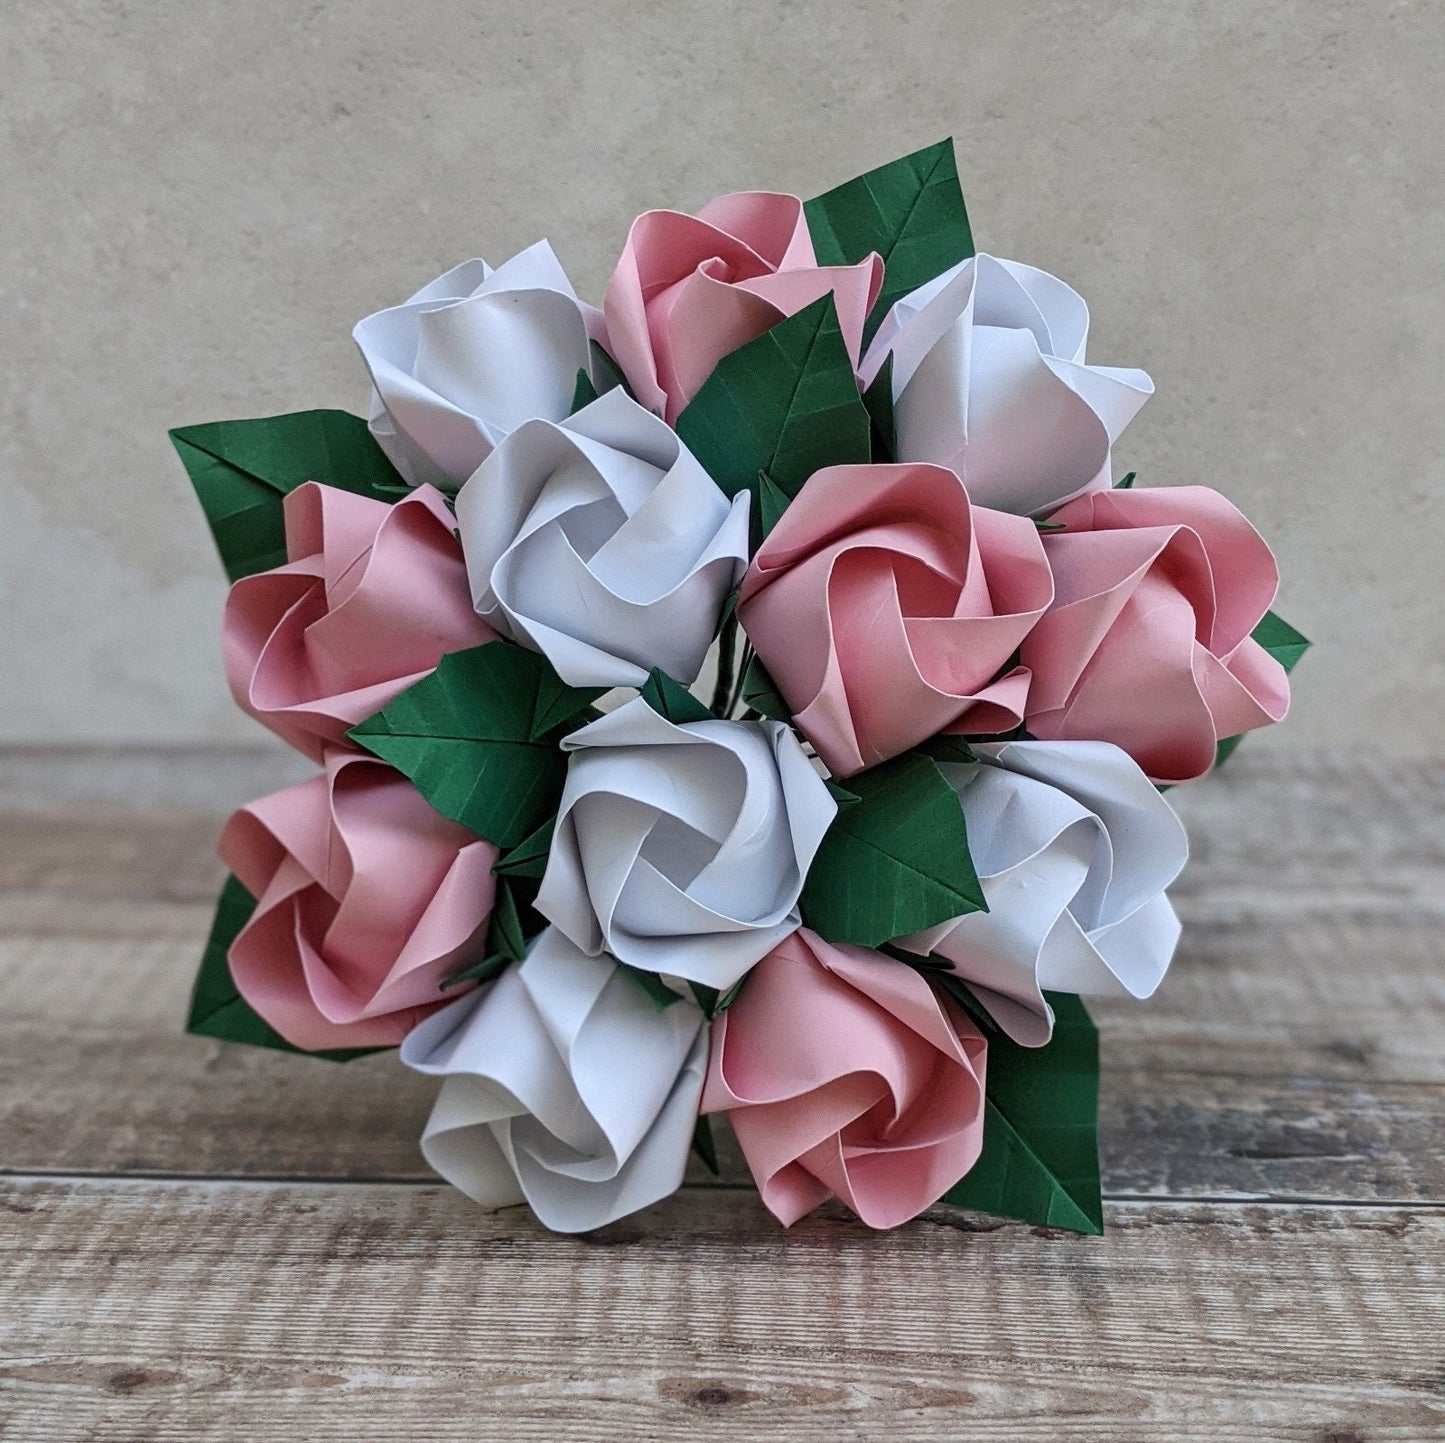 Bouquet of one dozen origami paper roses, wedding anniversary gift